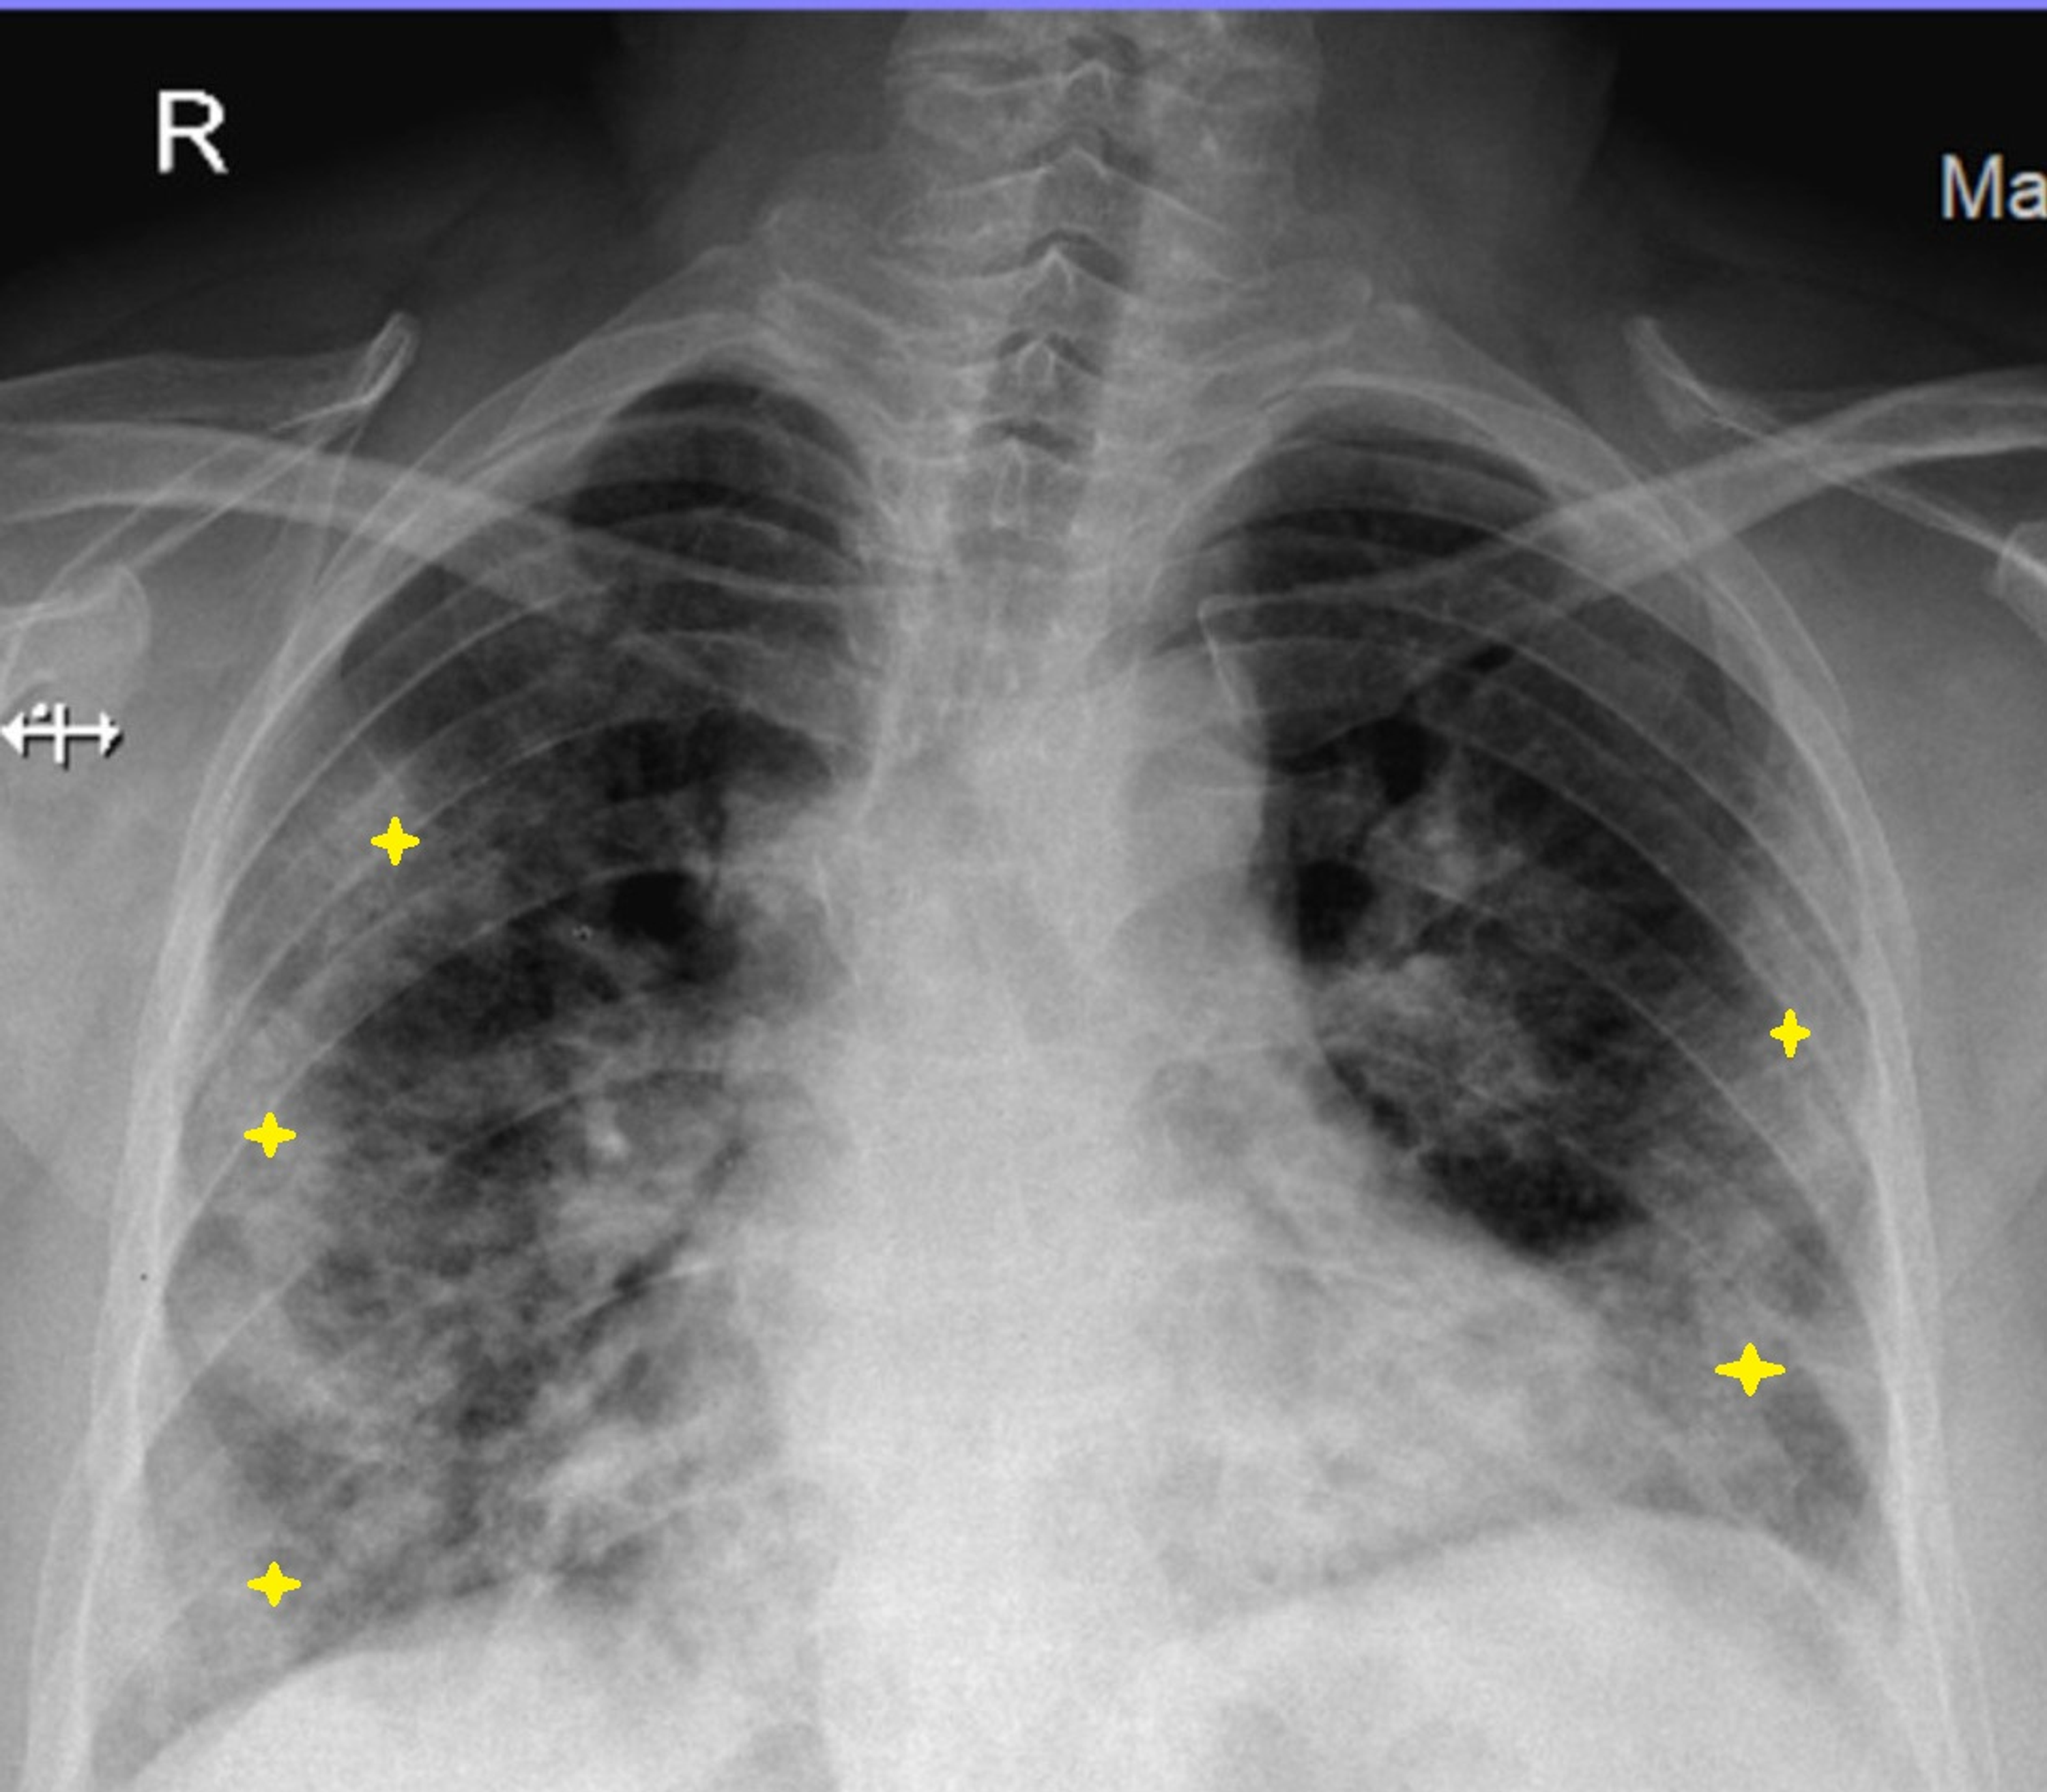 staph pneumonia chest x ray findings